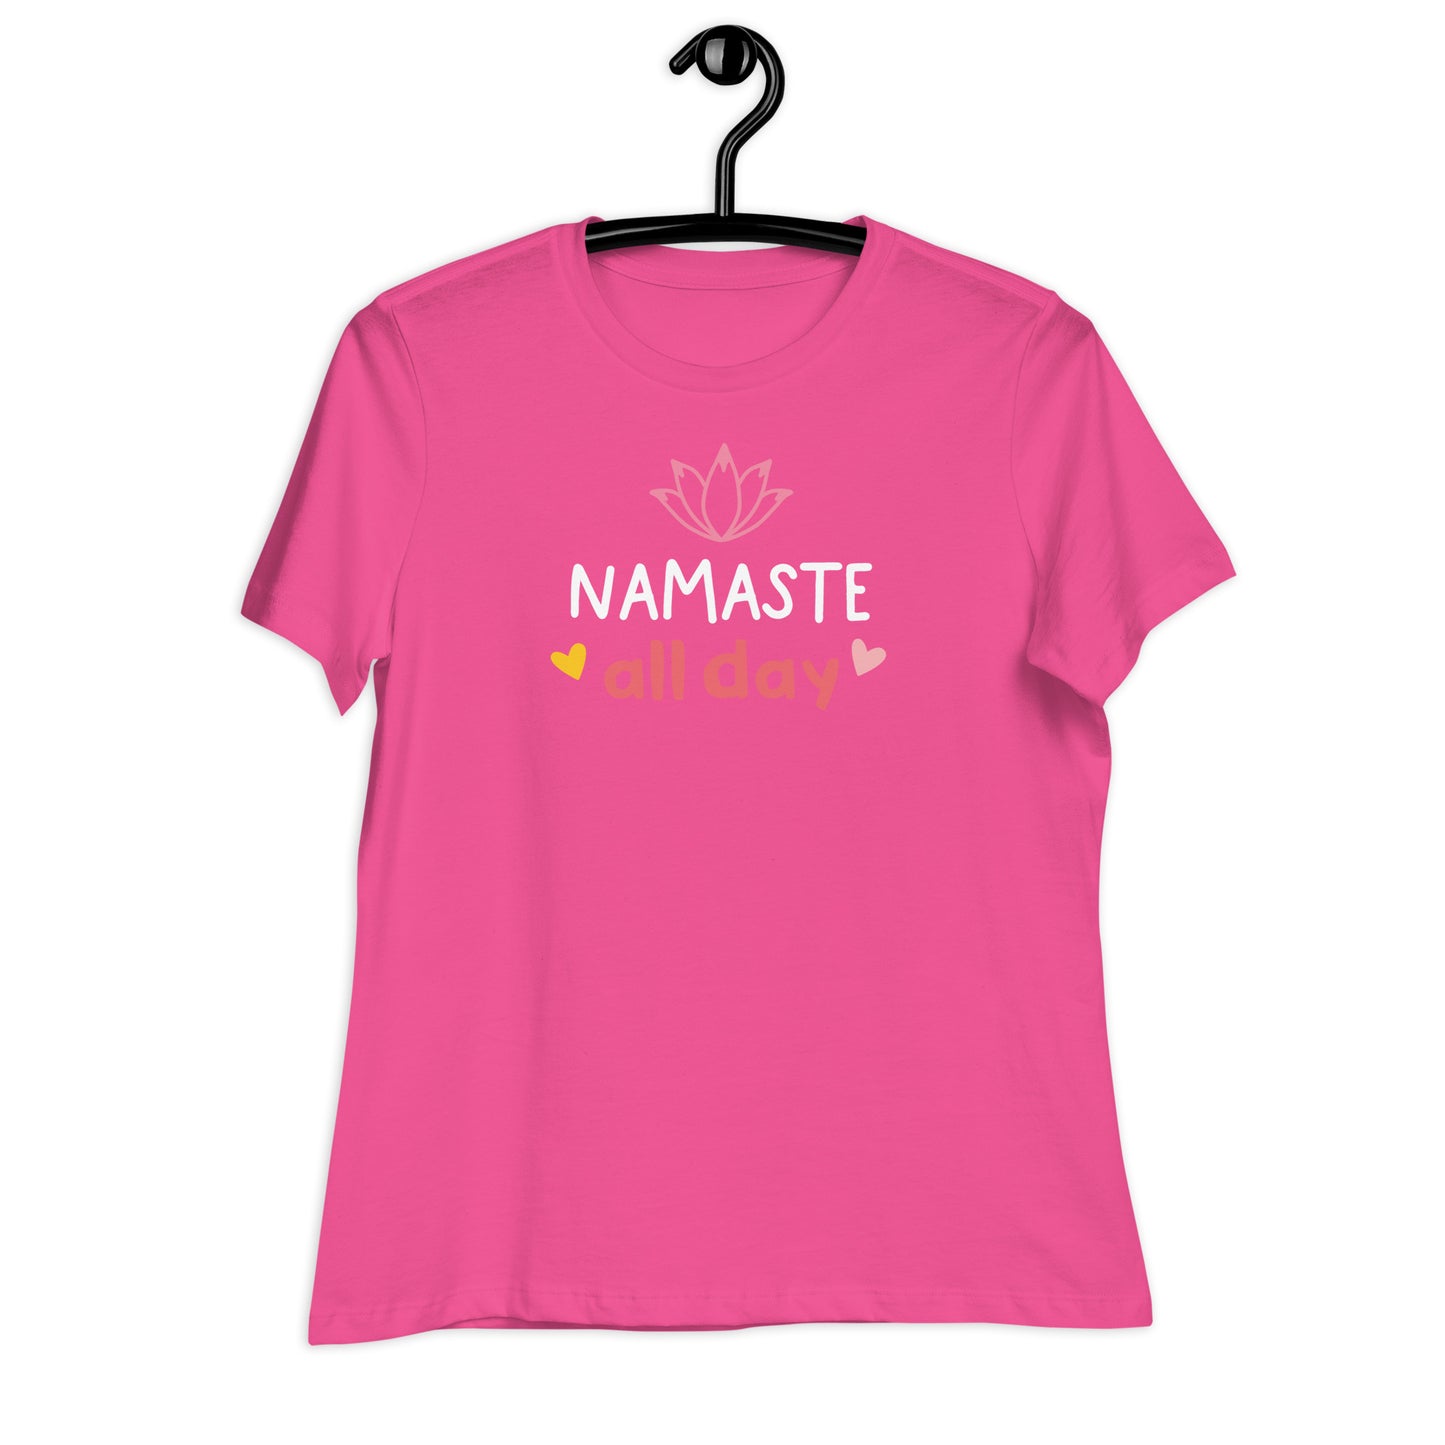 Namaste All Day' Yoga Lover T-Shirt – Perfect for Your Serene Style!